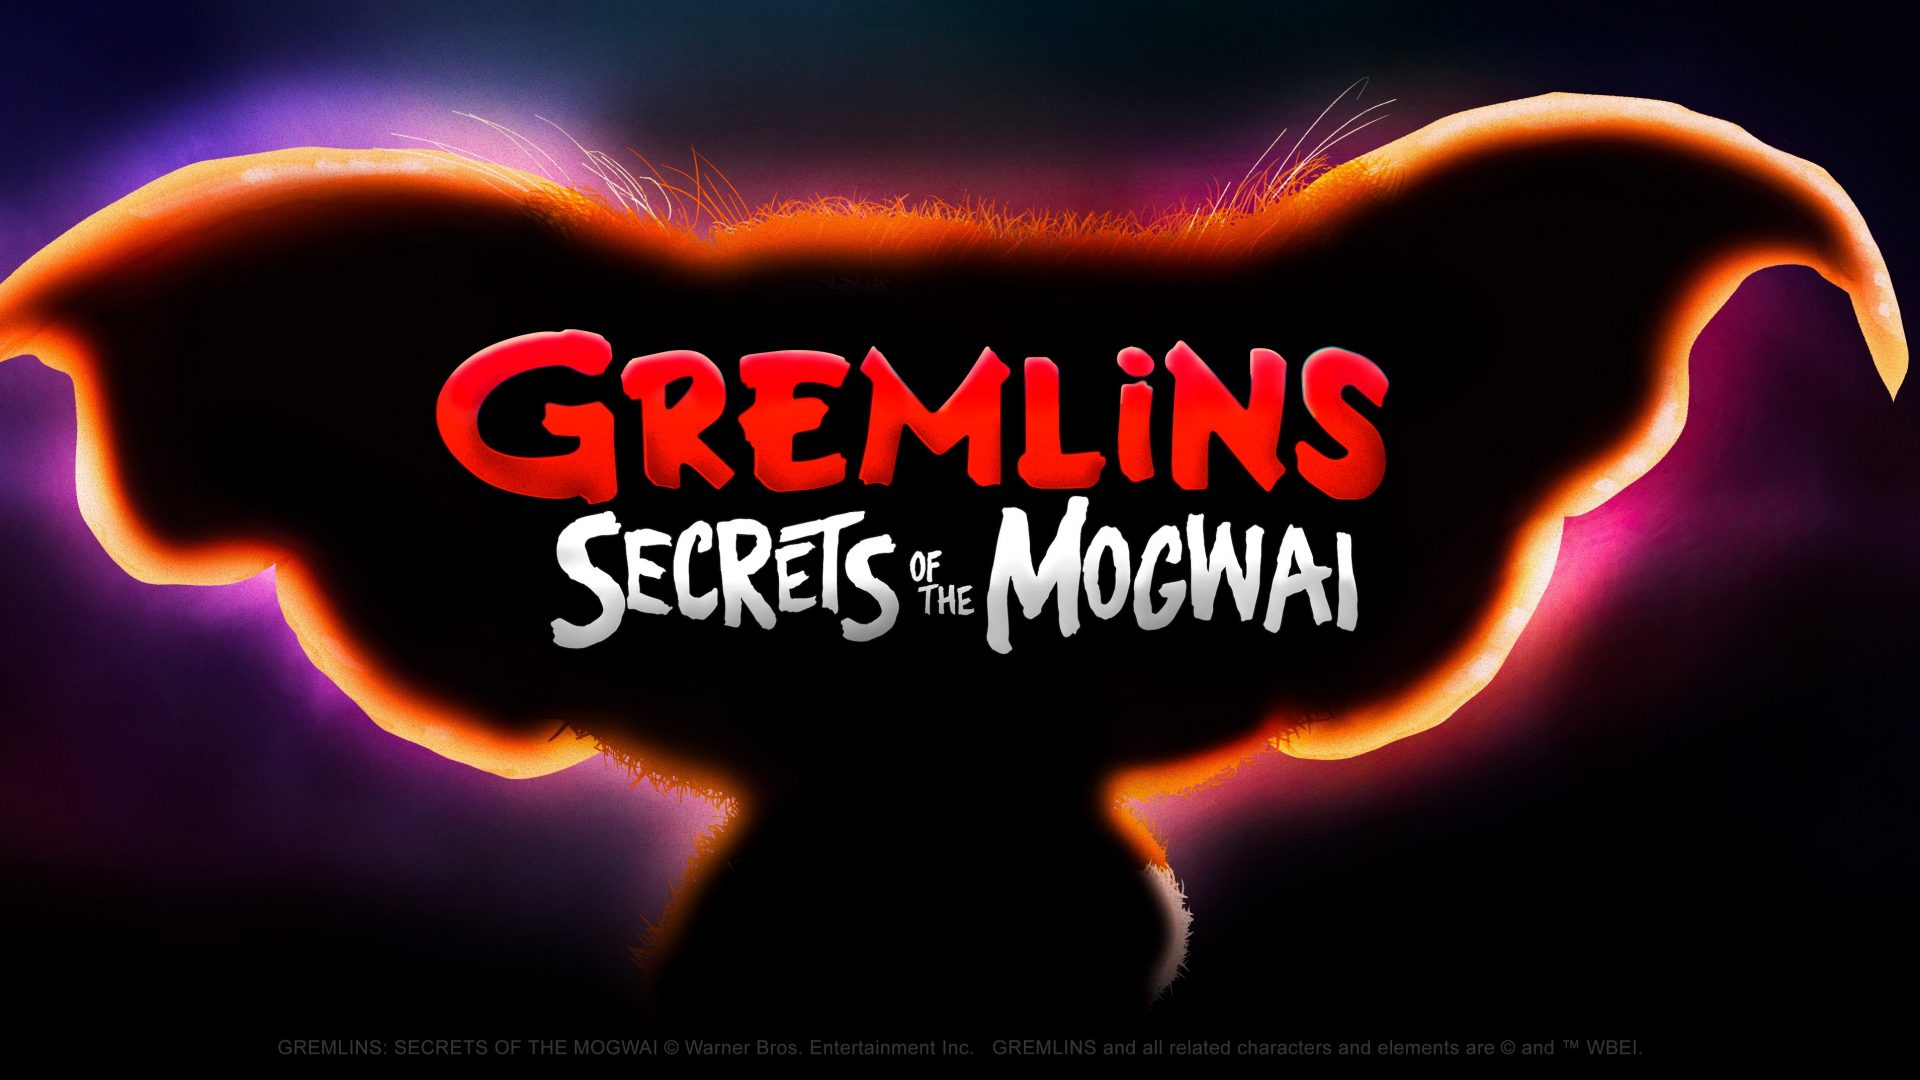 The Gremlins animated series title card